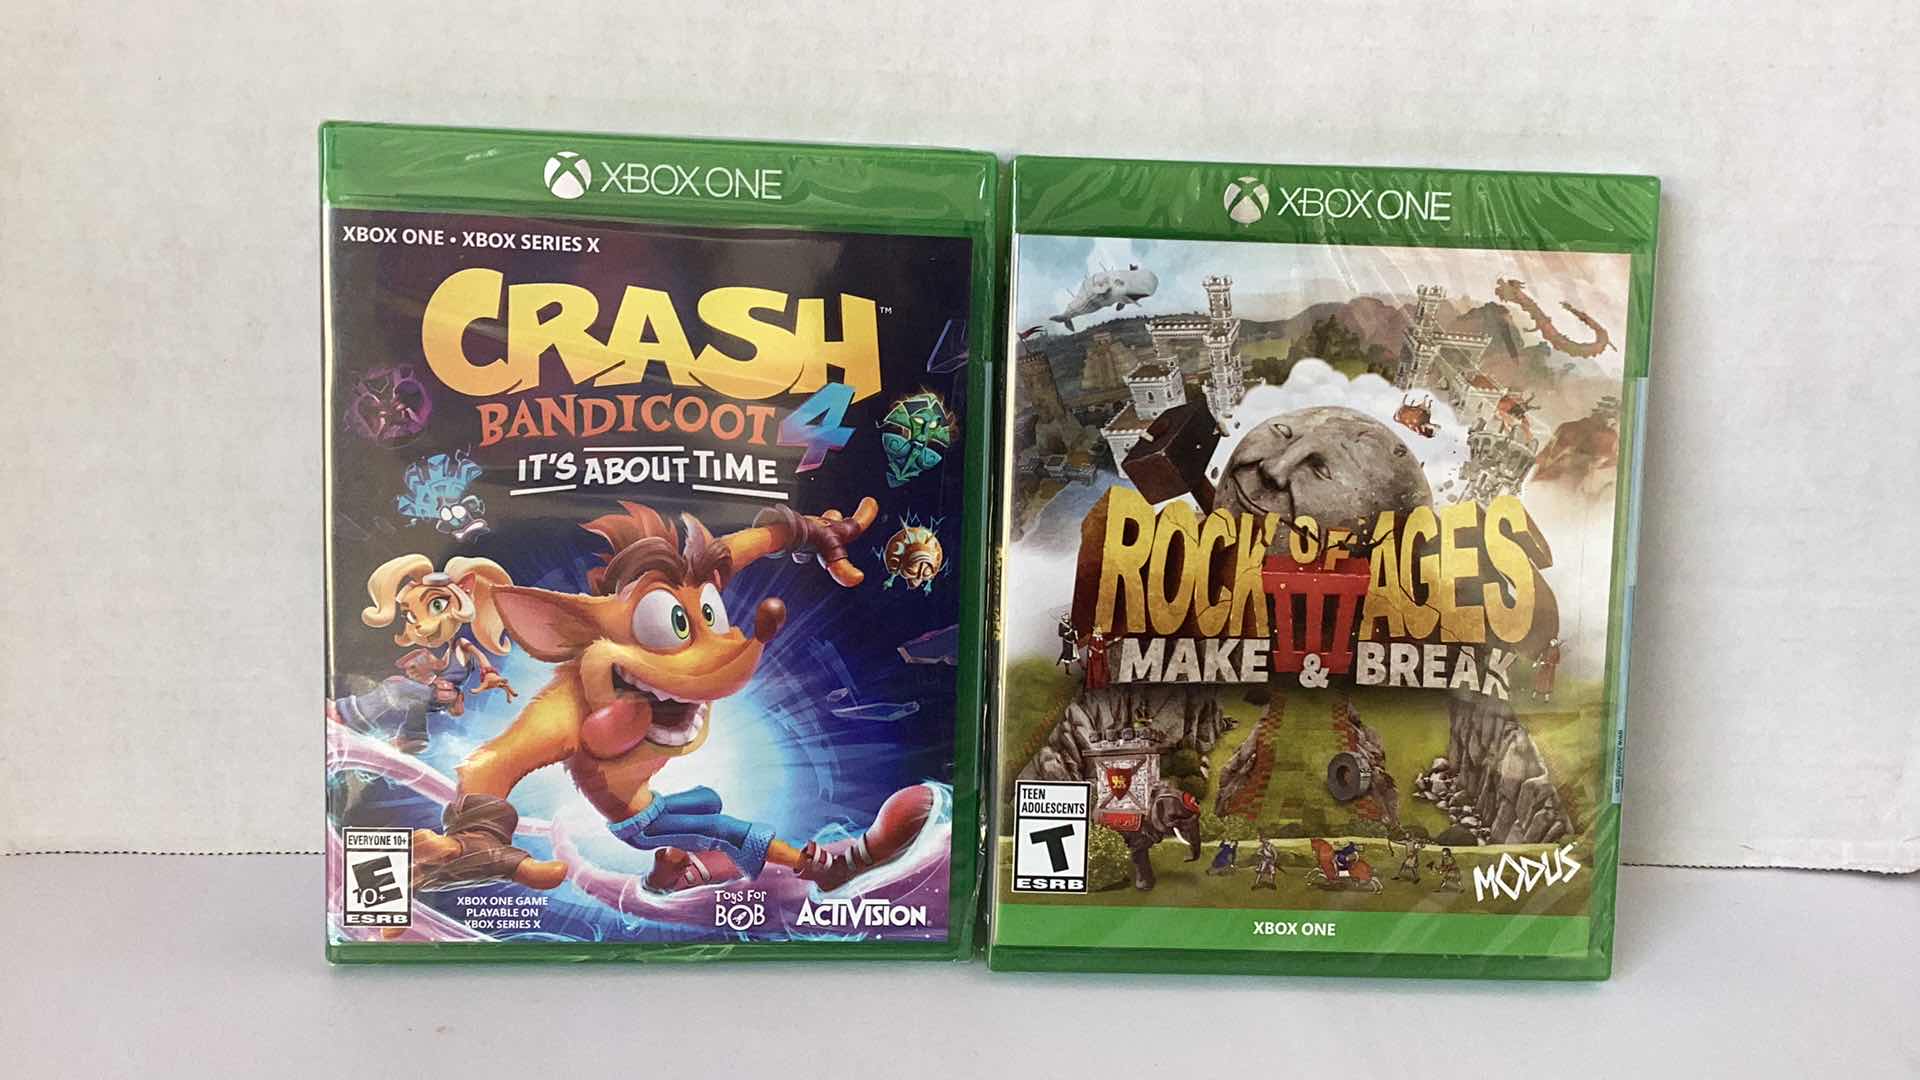 Photo 1 of 2 NEW X-BOX GAMES: CRASH BANDICOOT 4 AND ROCK OF AGES III